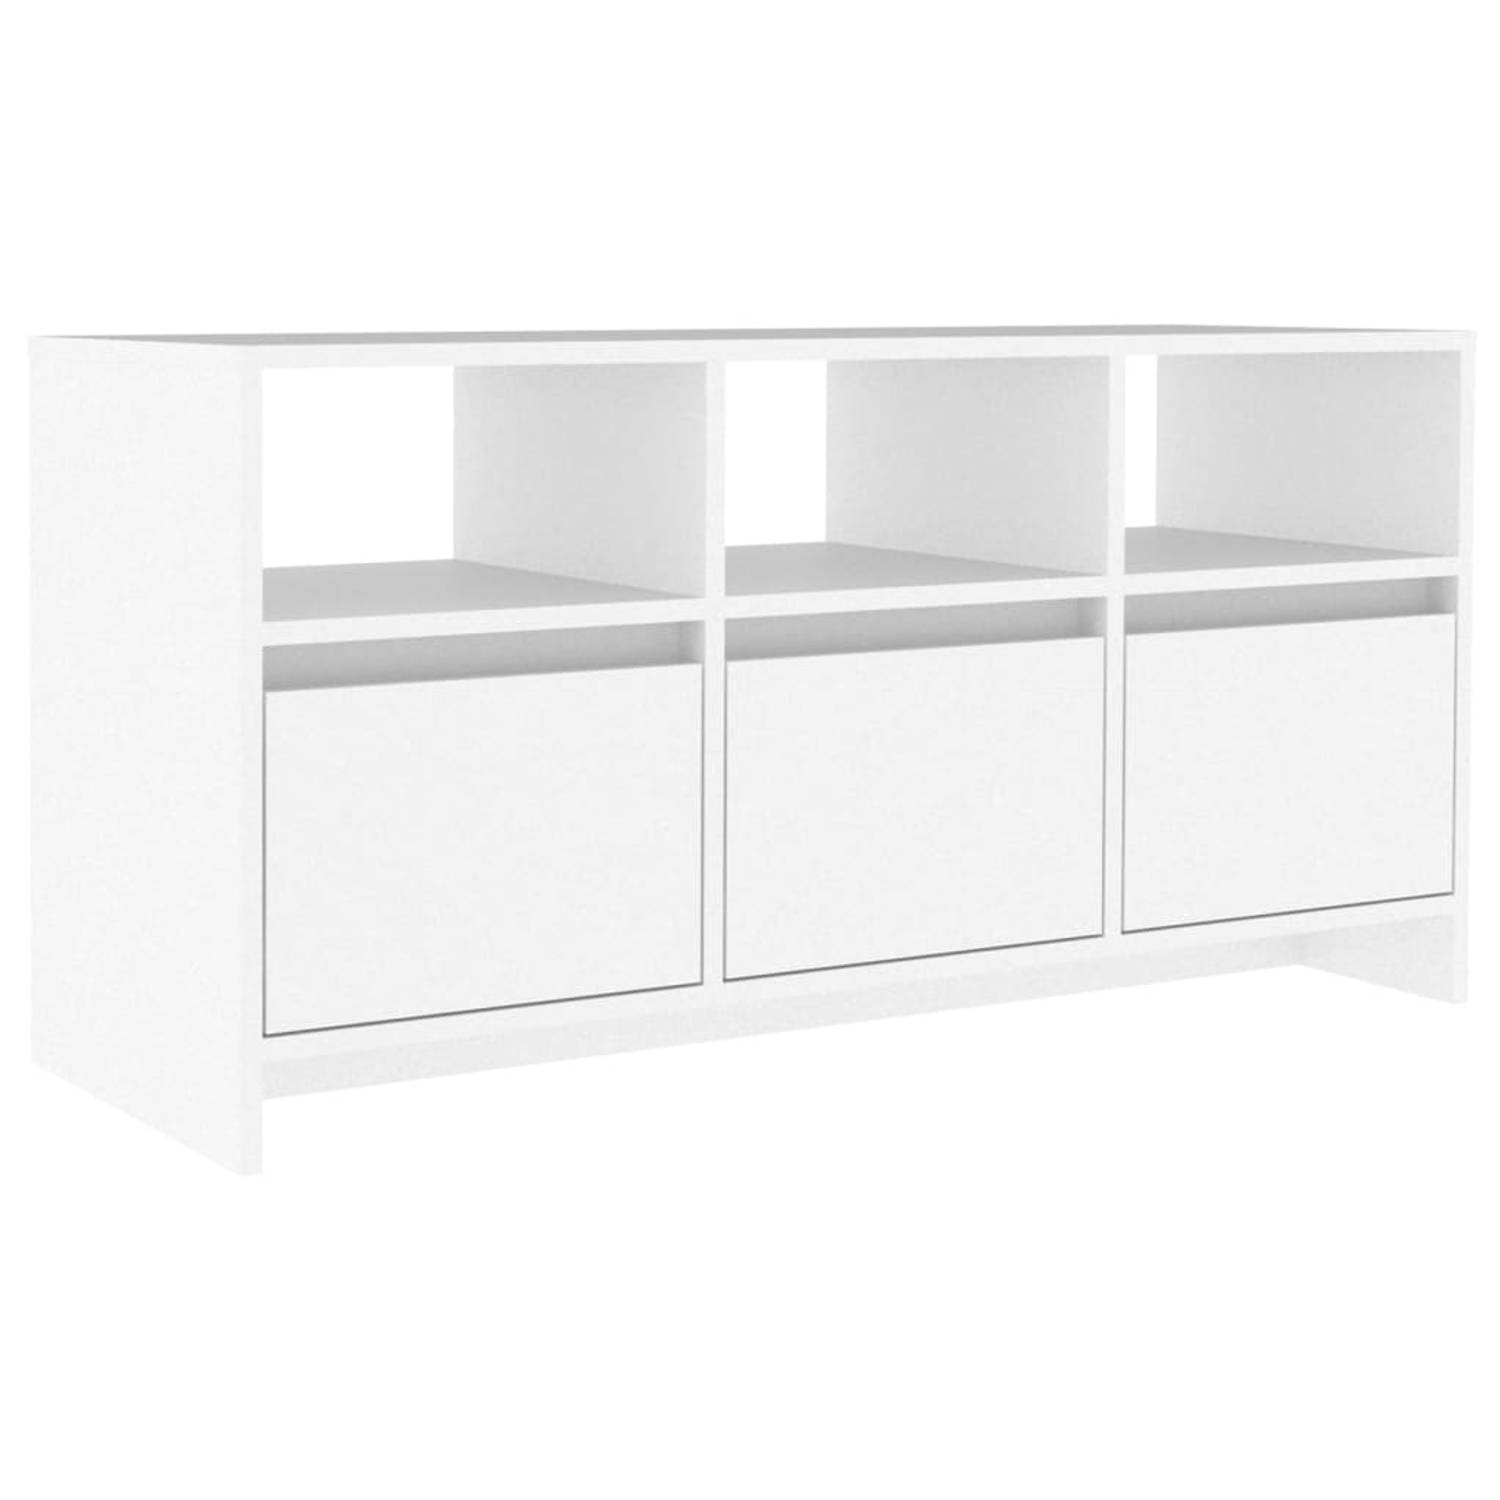 The Living Store Televisiemeubel Woonkamer - 102 x 37.5 x 52.5 - Wit